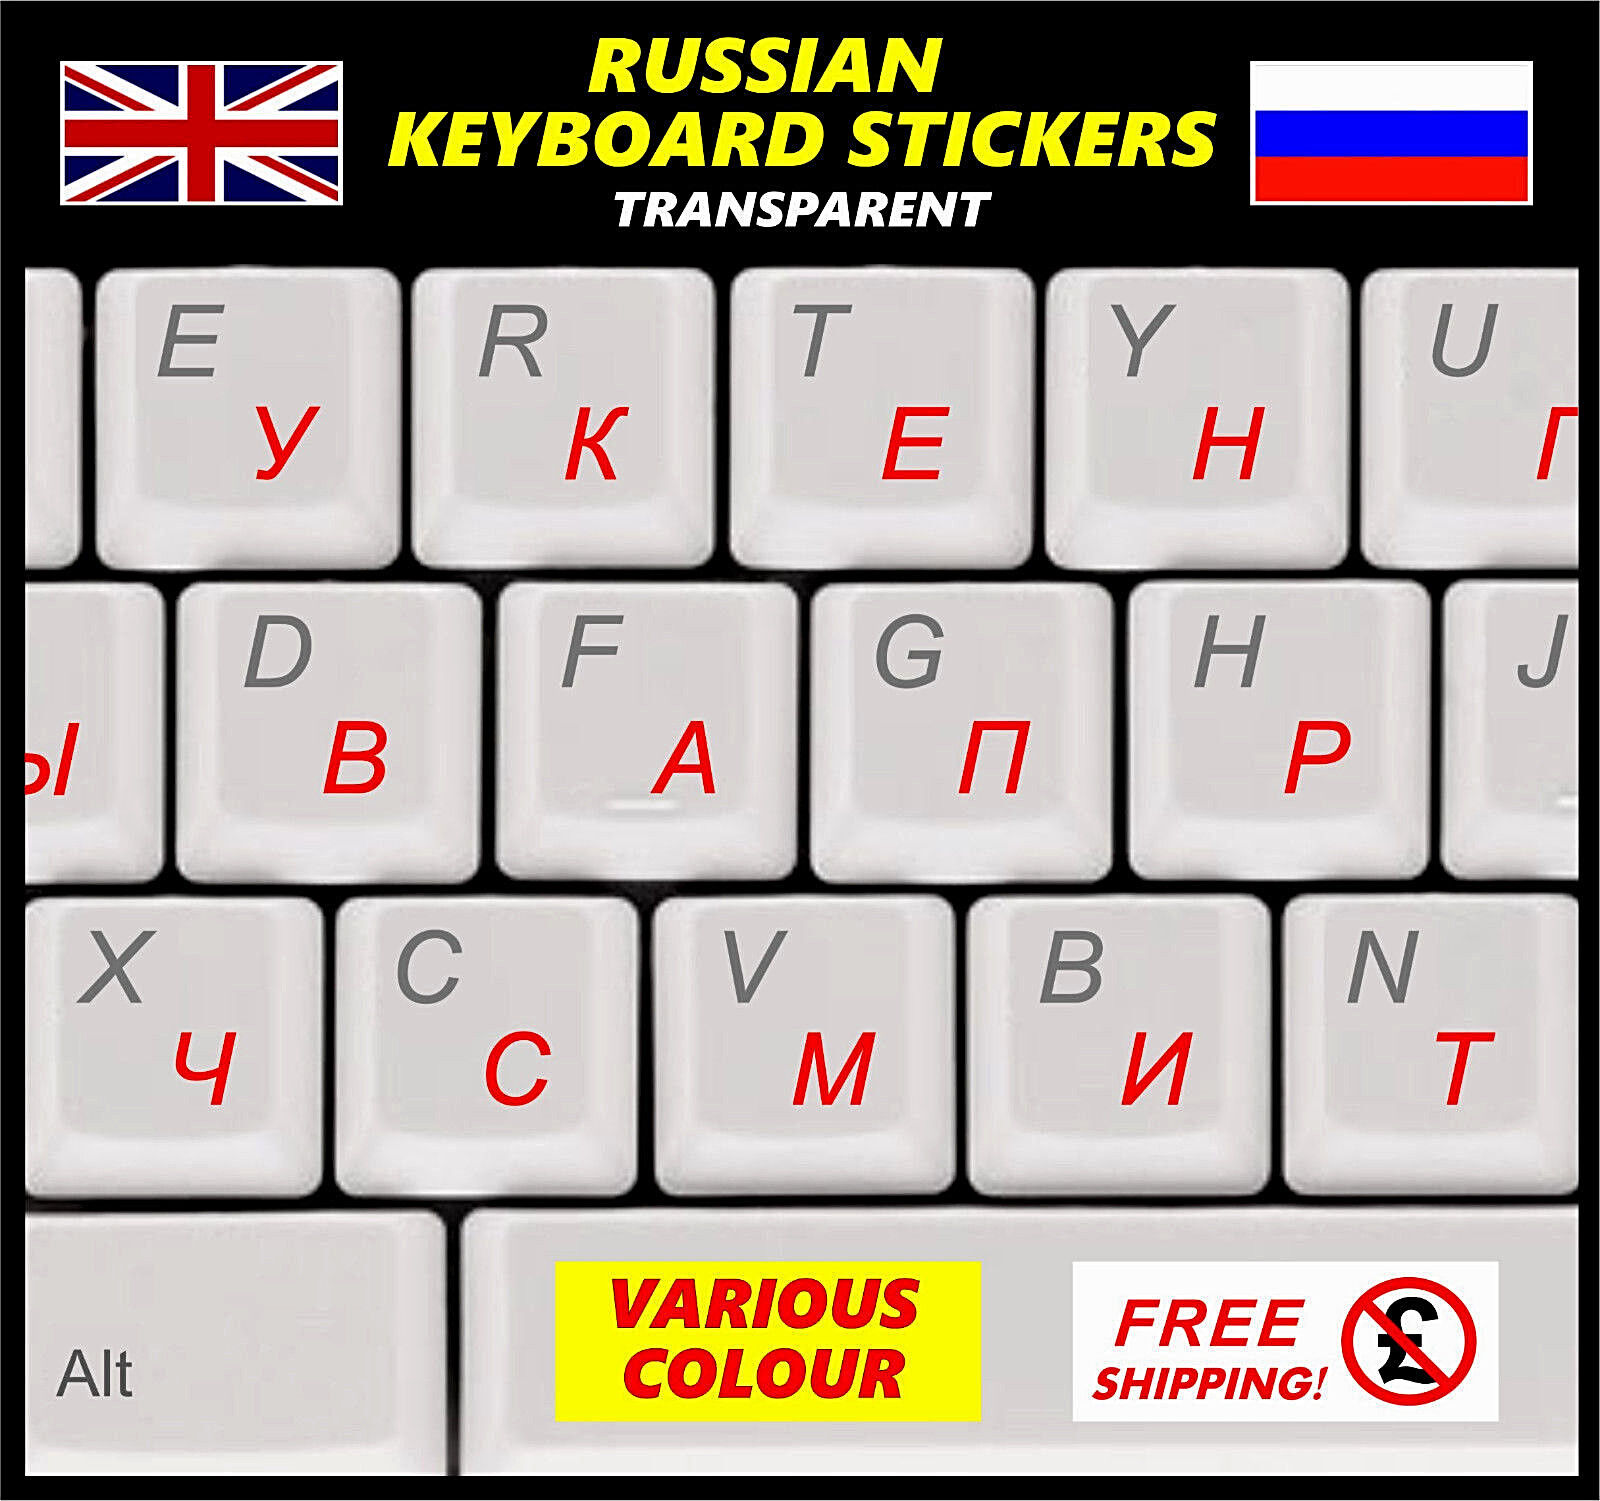 Russian Keyboard Stickers RED Letters Transparent Computer Laptop PC Antiglare